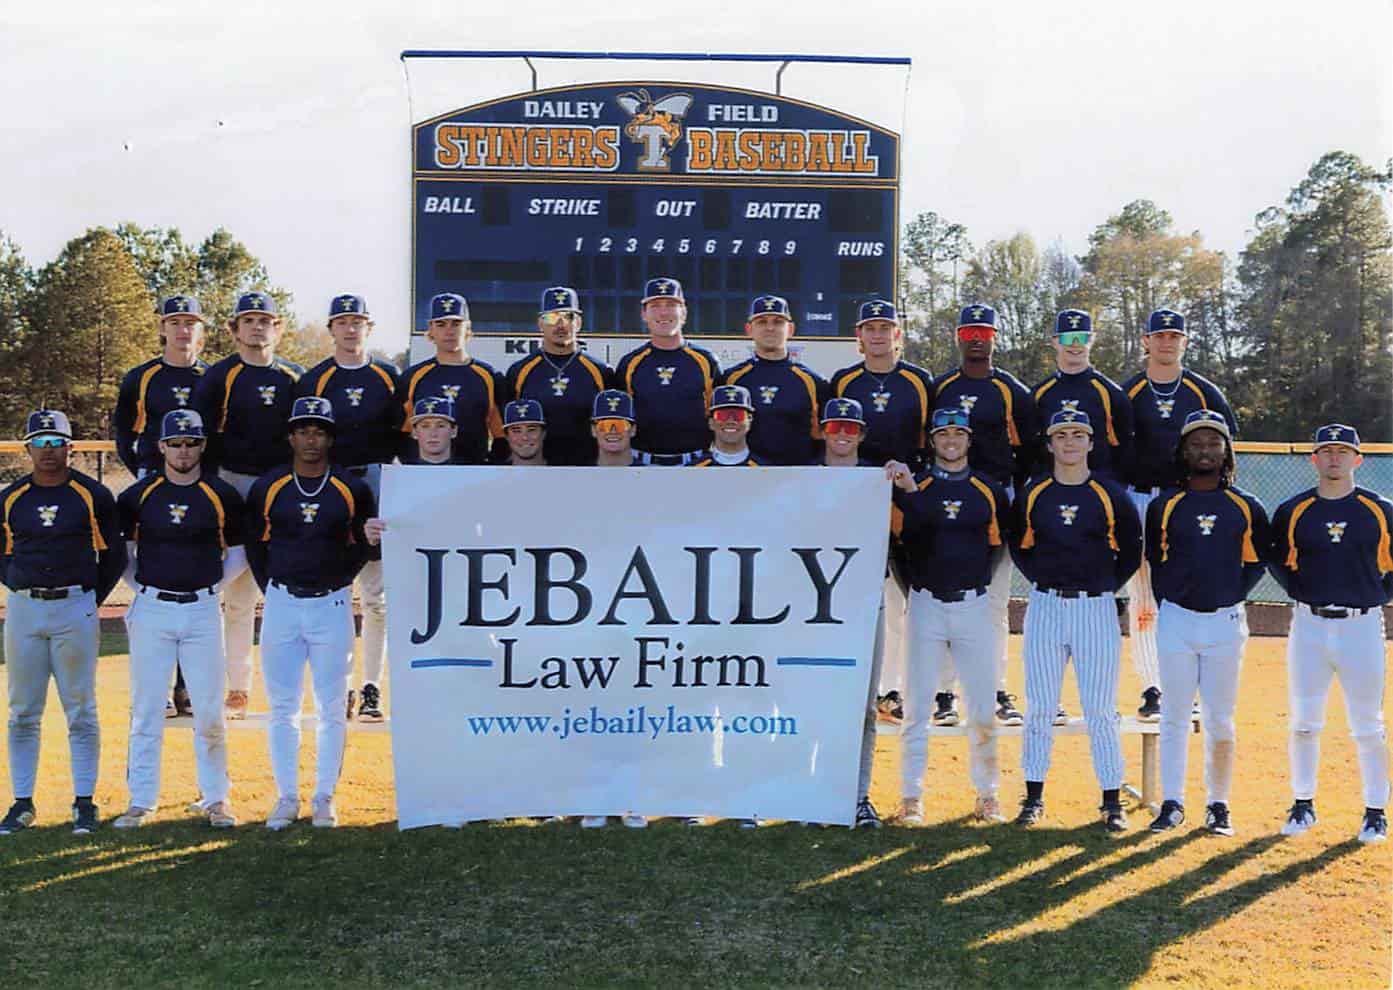 a men's baseball team stands posing on a field for a photo behind a sign reading JEBAILY Law Firm